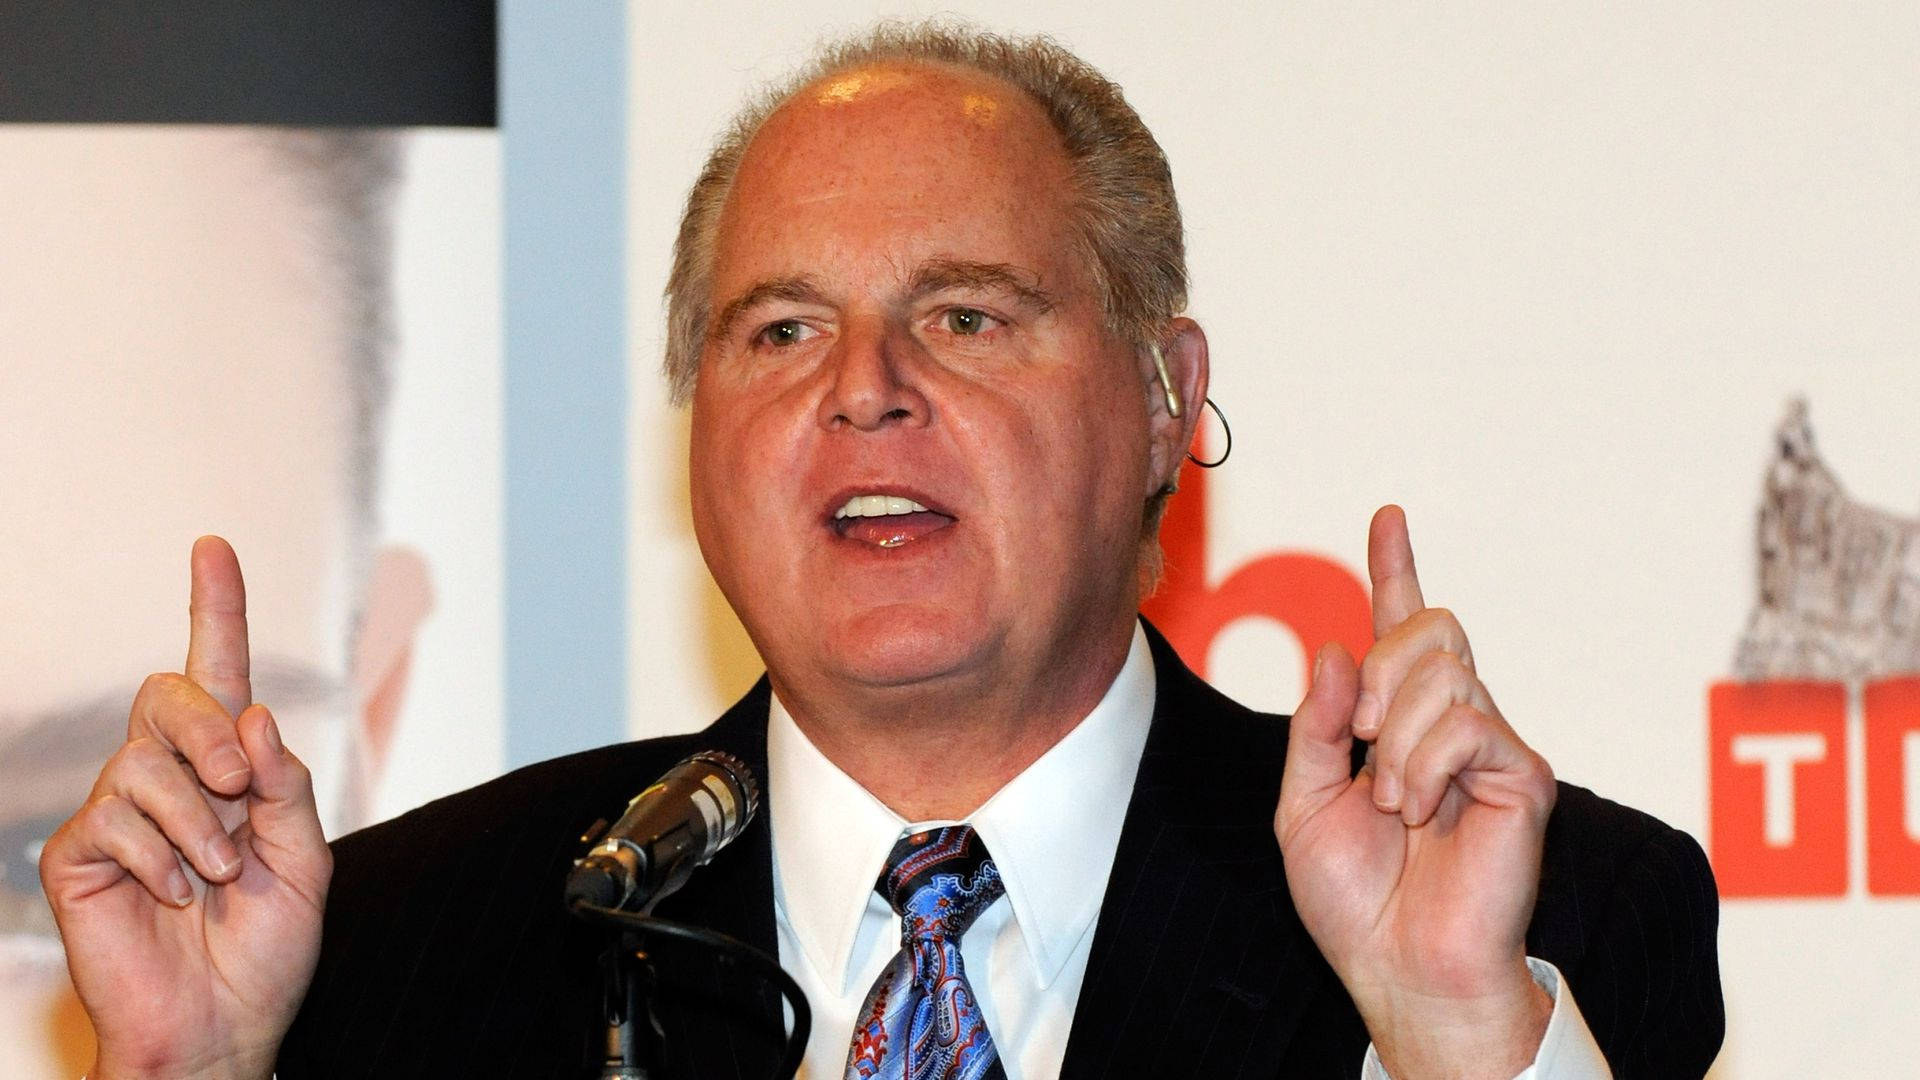 Rush Limbaugh Pageant Conference